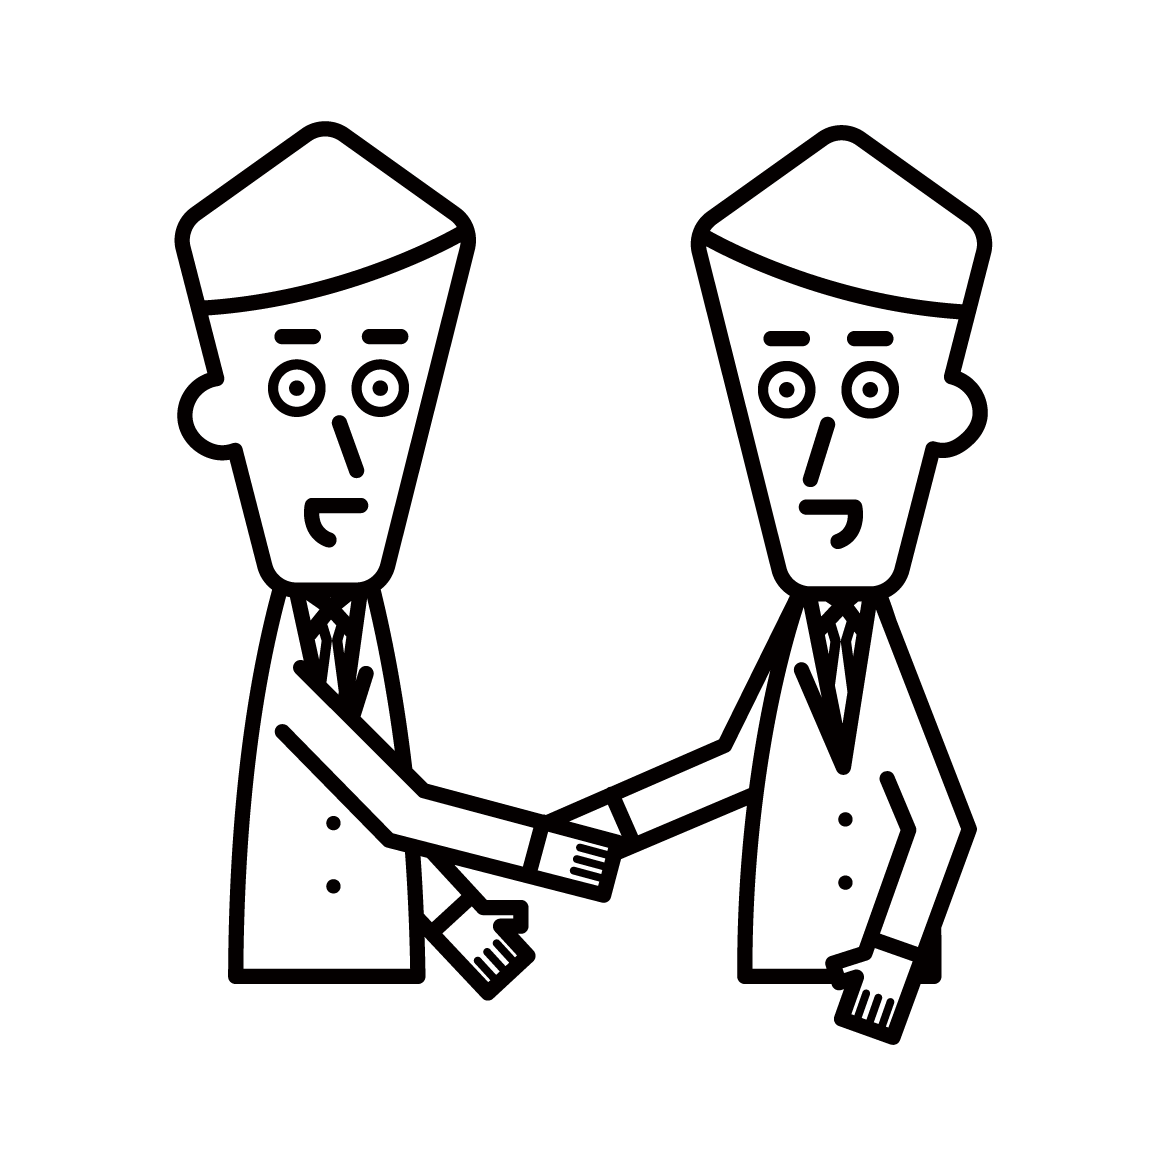 Illustration of a person shaking hands and trusting relationship (male)